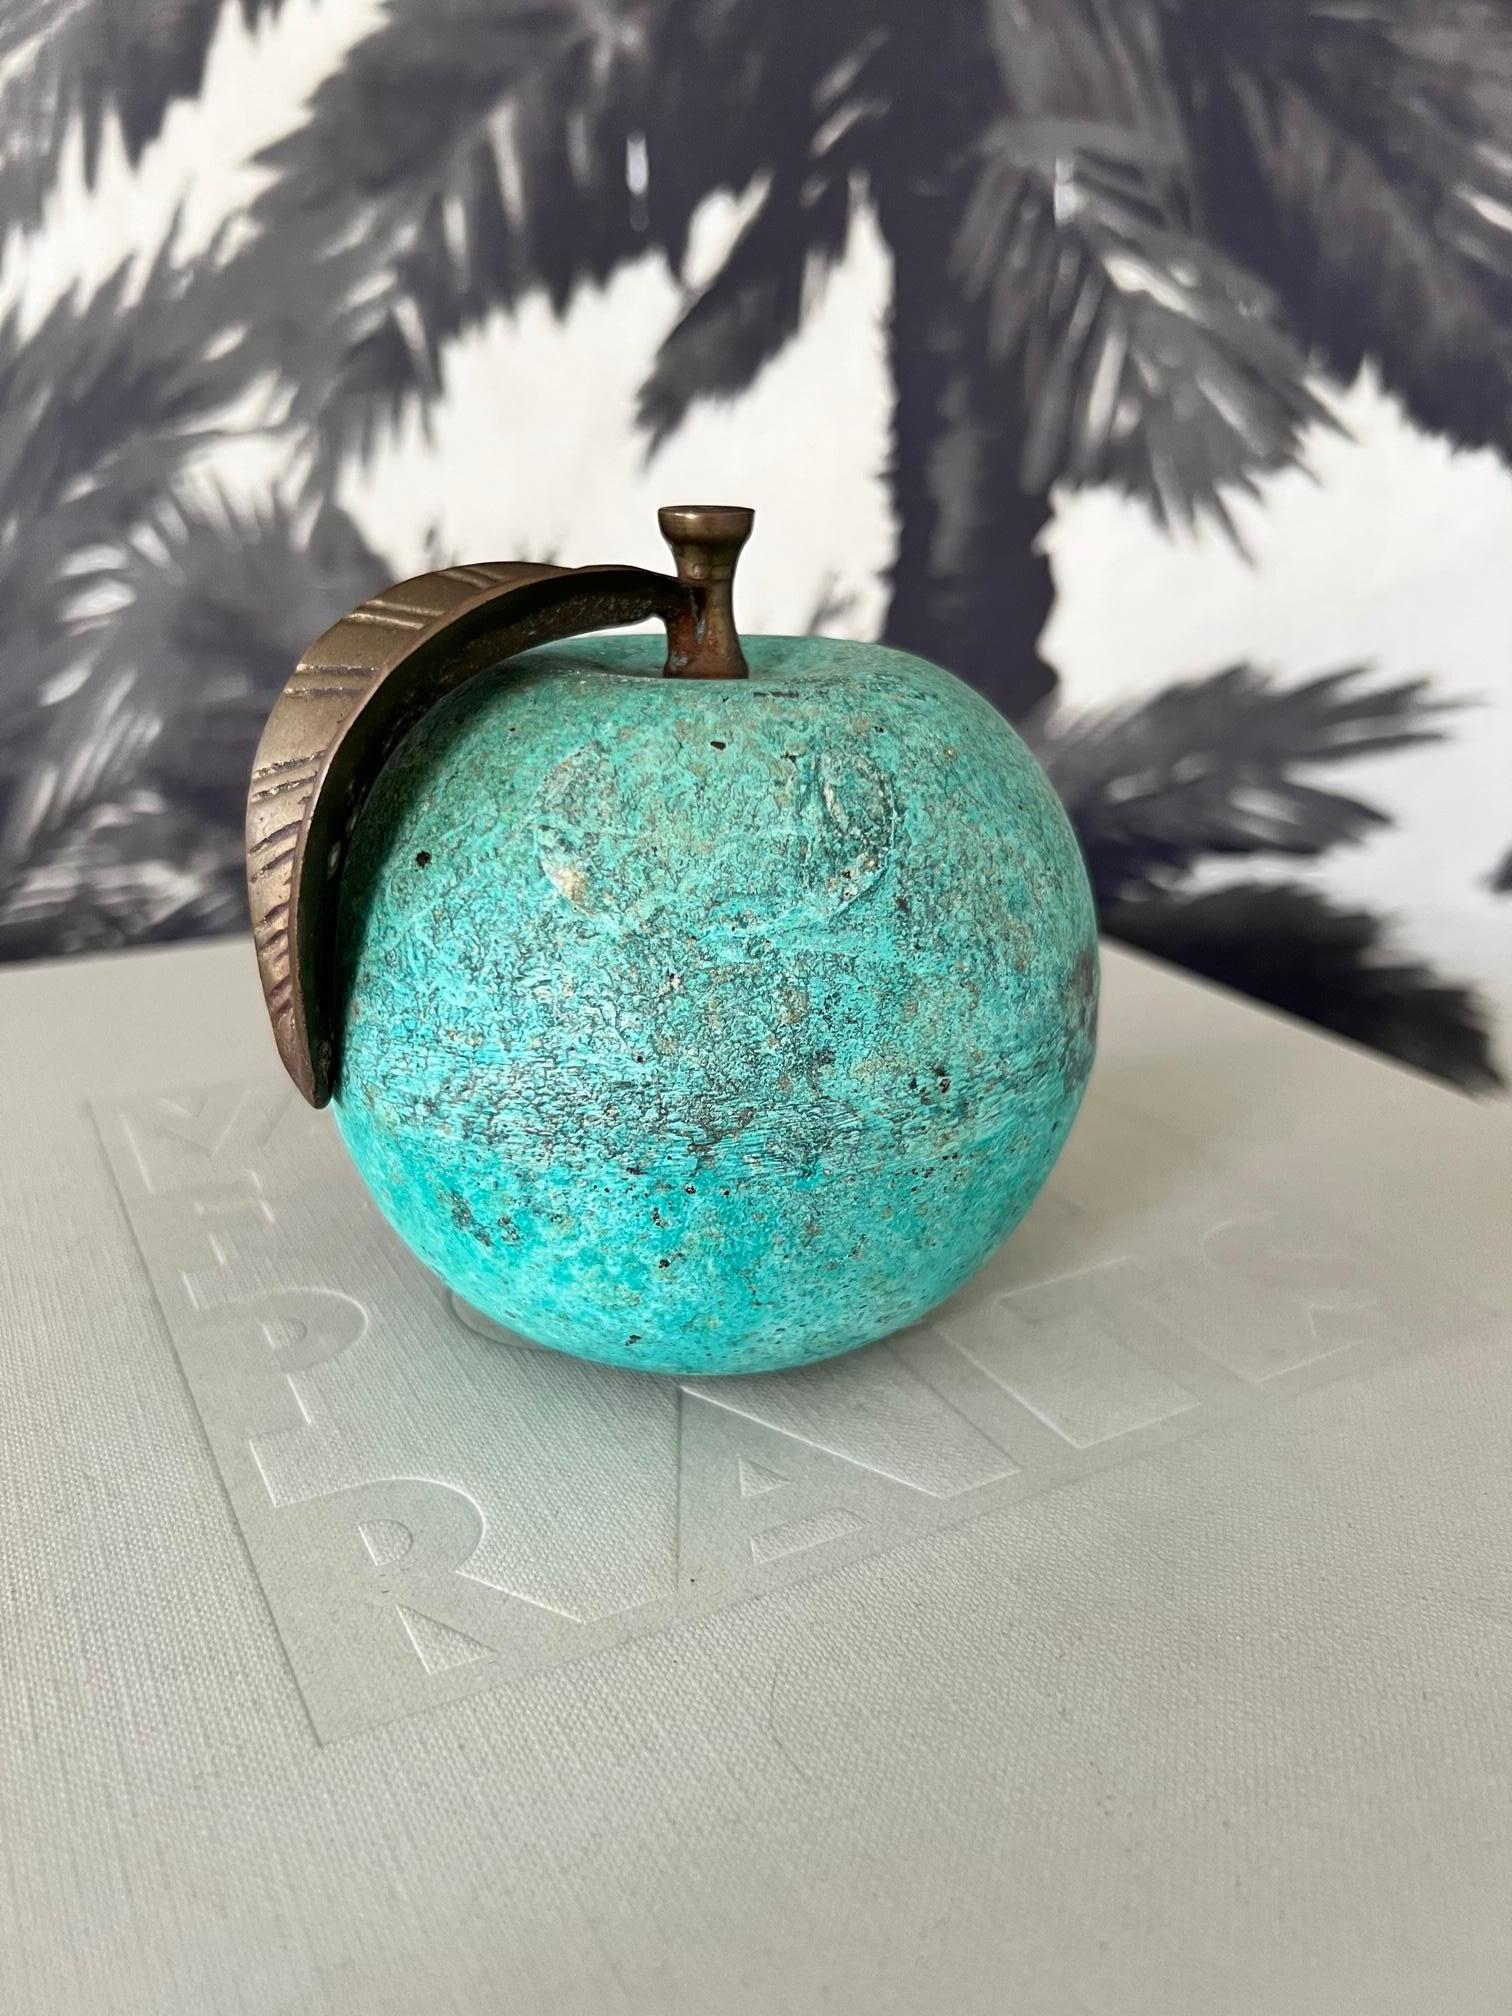 1970's French figurative sculpture and paperweight of a bronze apple with an oxidized green patinated finish.
The sculpture features a stylized stem and leaf in bronzed metal with incised carved details. Makes the perfect desk accessory or